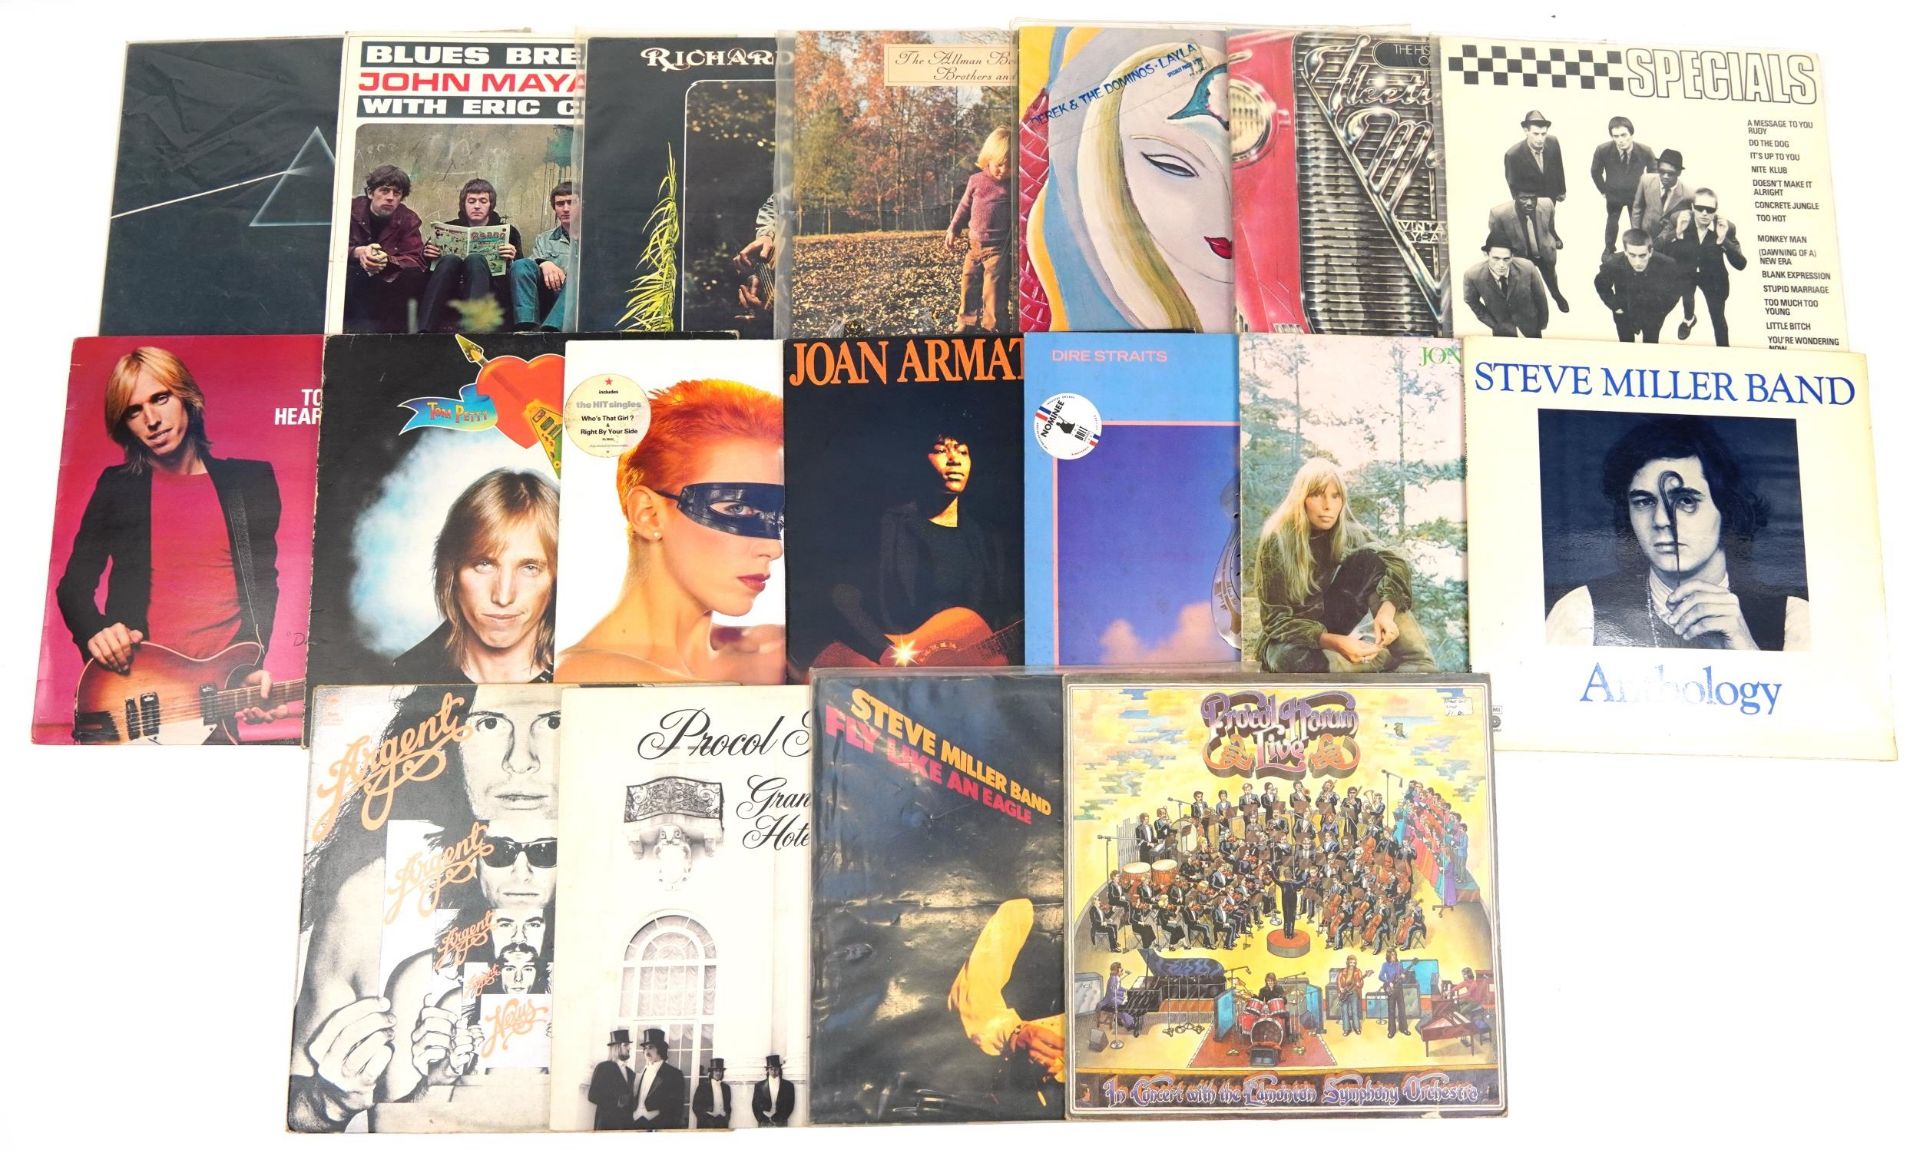 Vinyl LP records including John Mayall Beano cover, Pink Floyd and The Allman Brothers Band : For